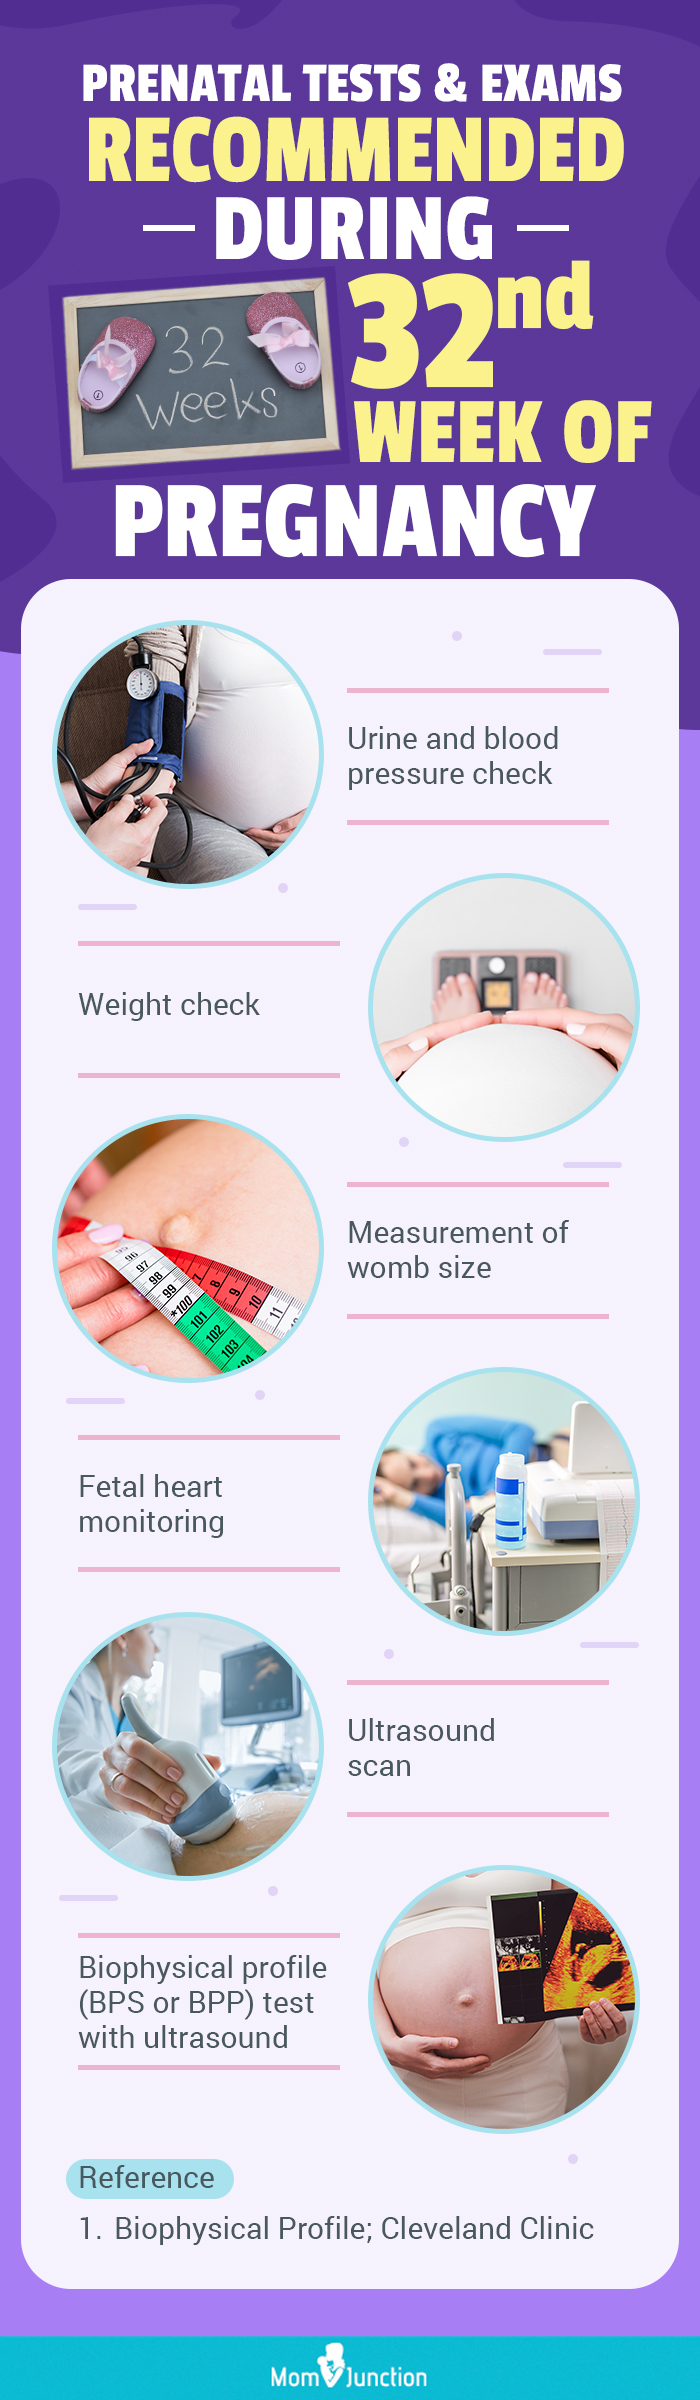 prenatal tests and exams recommended during 32nd week of pregnancy (infographic)